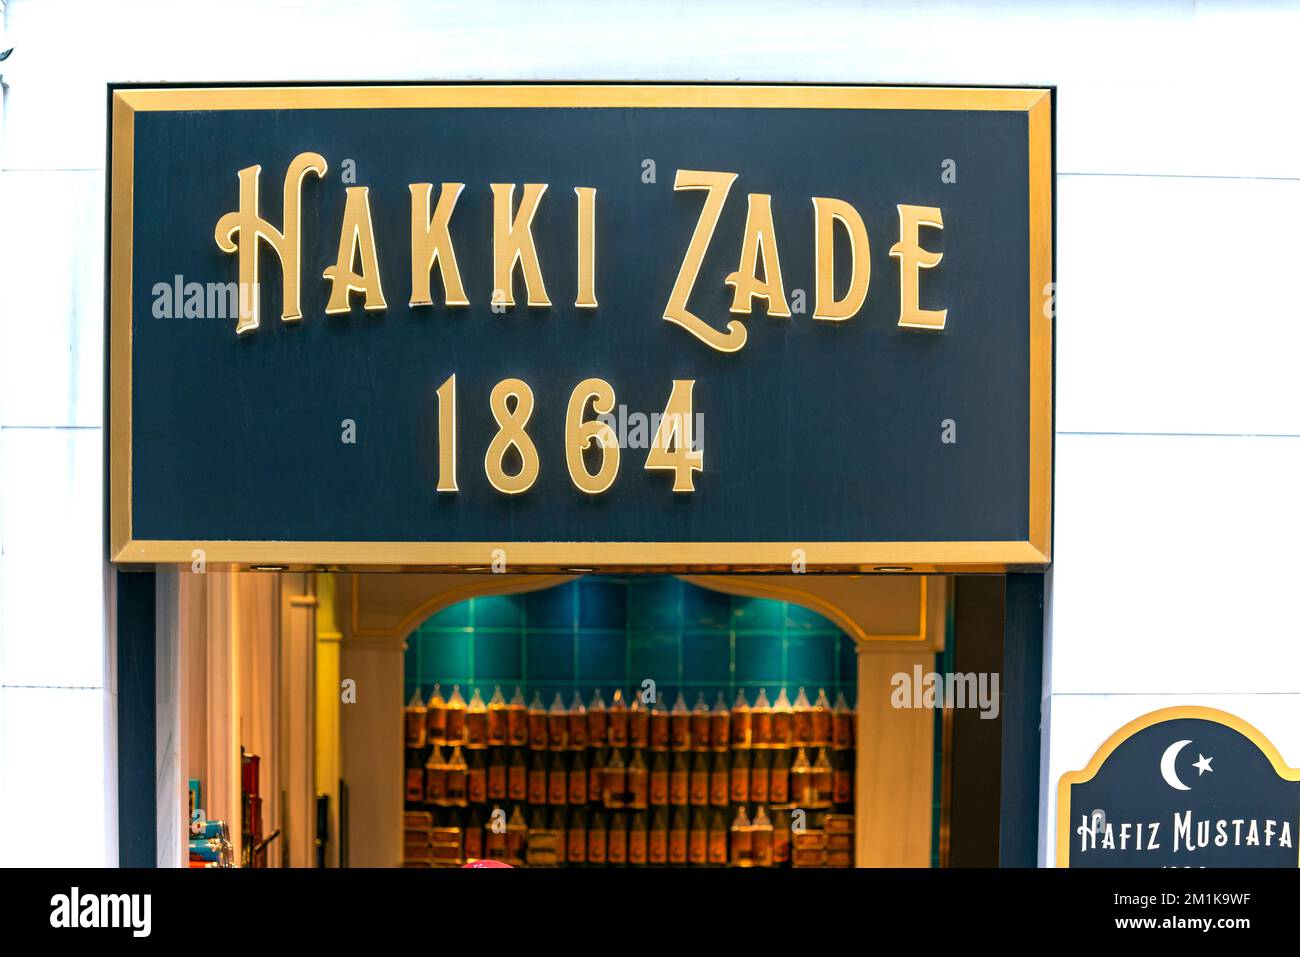 ISTANBUL - JAN 05: Signboard of the Hakki Zade and Hafiz Mustafa Confectionery in Istanbul, on January 05. 2021 in Turkey.  It is a  famous historical Stock Photo